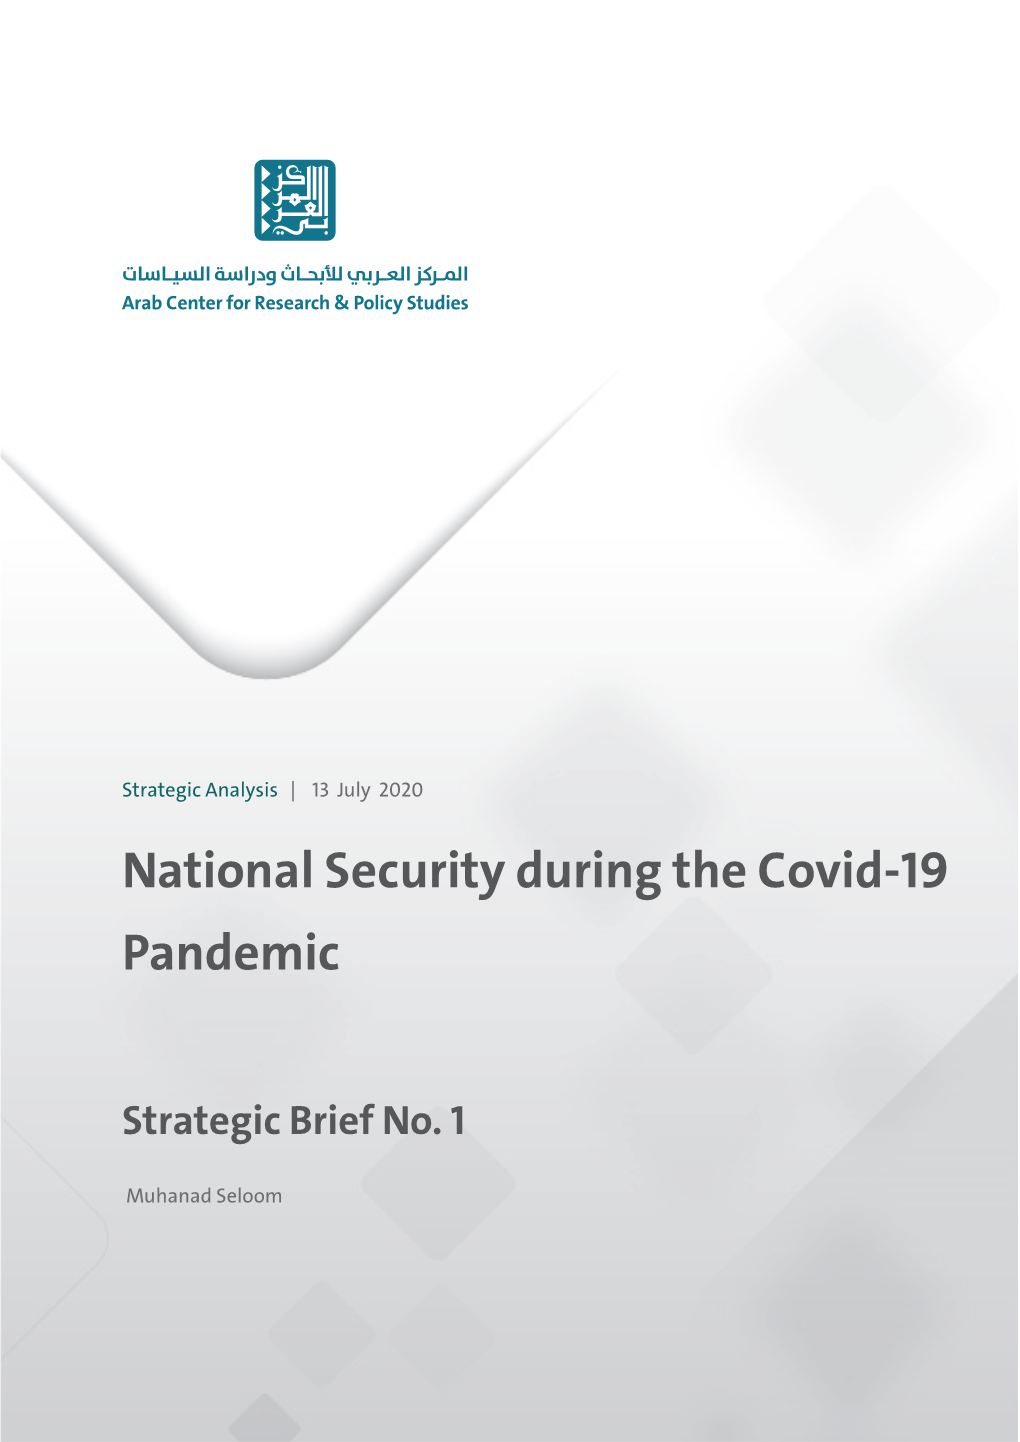 National Security During the Covid-19 Pandemic